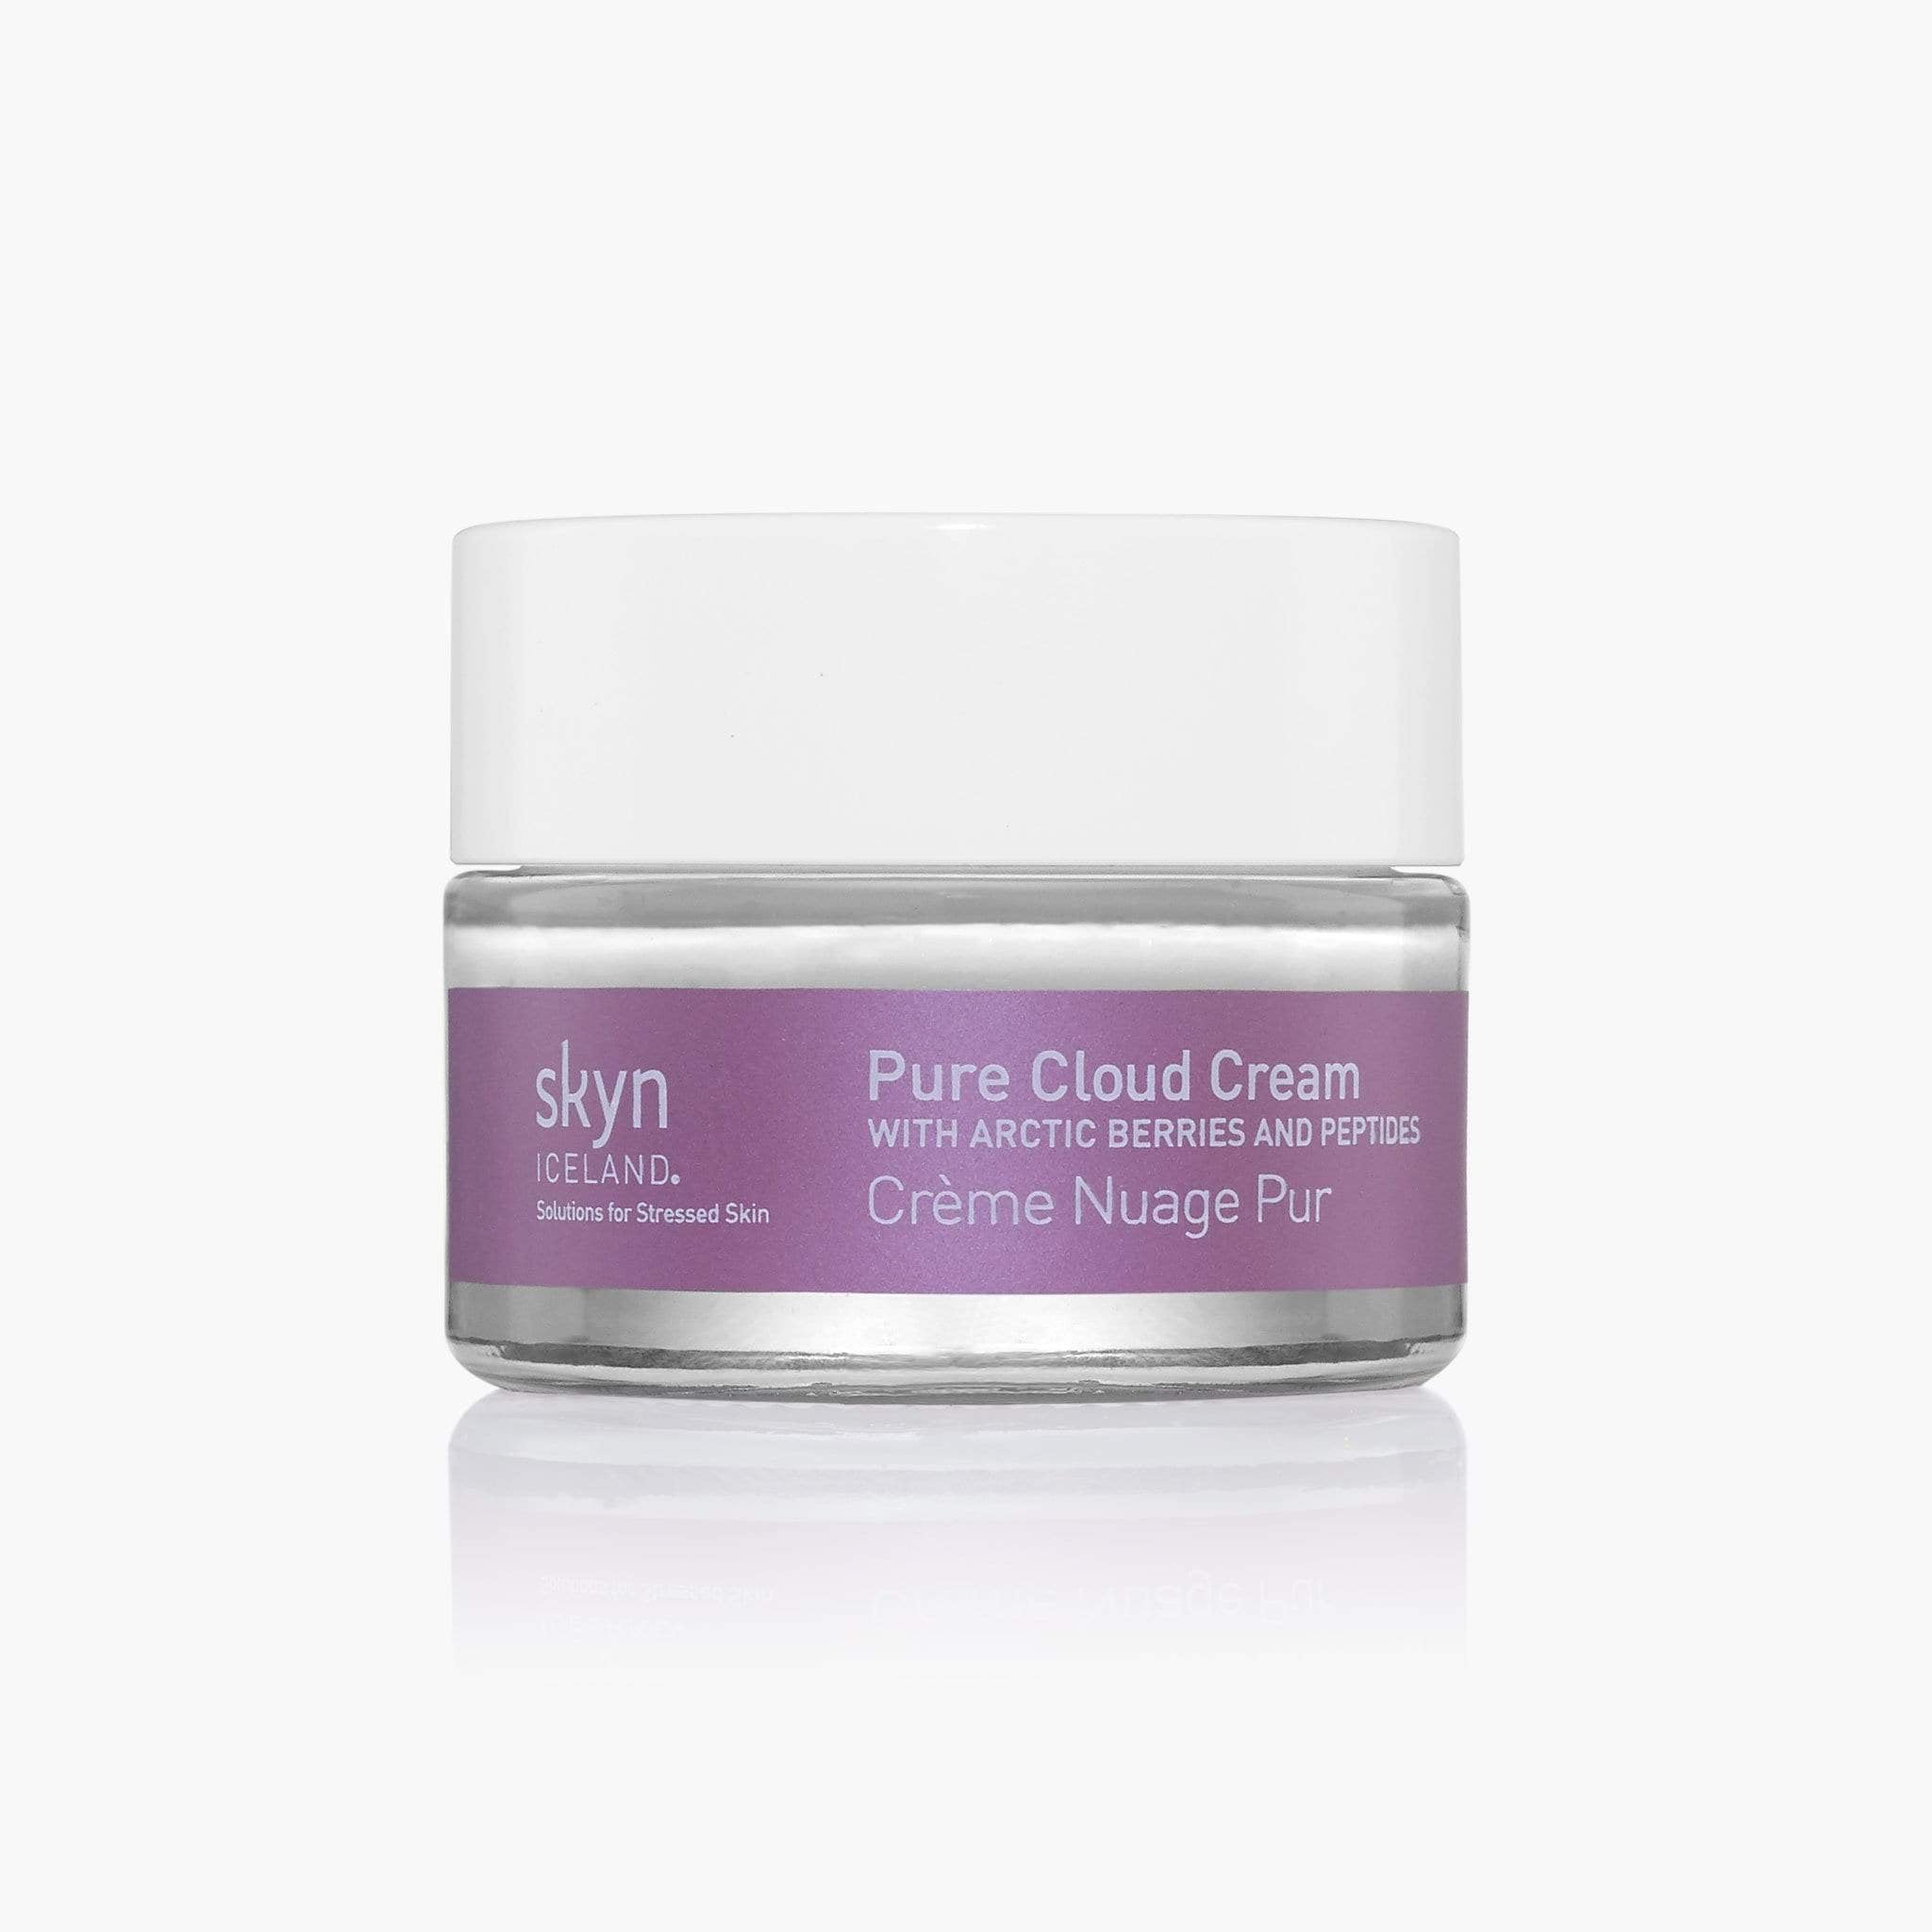 skyn ICELAND Pure Cloud Cream: Daily Moisturizer to Visibly Plump & Calm Sensitive Skin, 50g / 1.7 oz